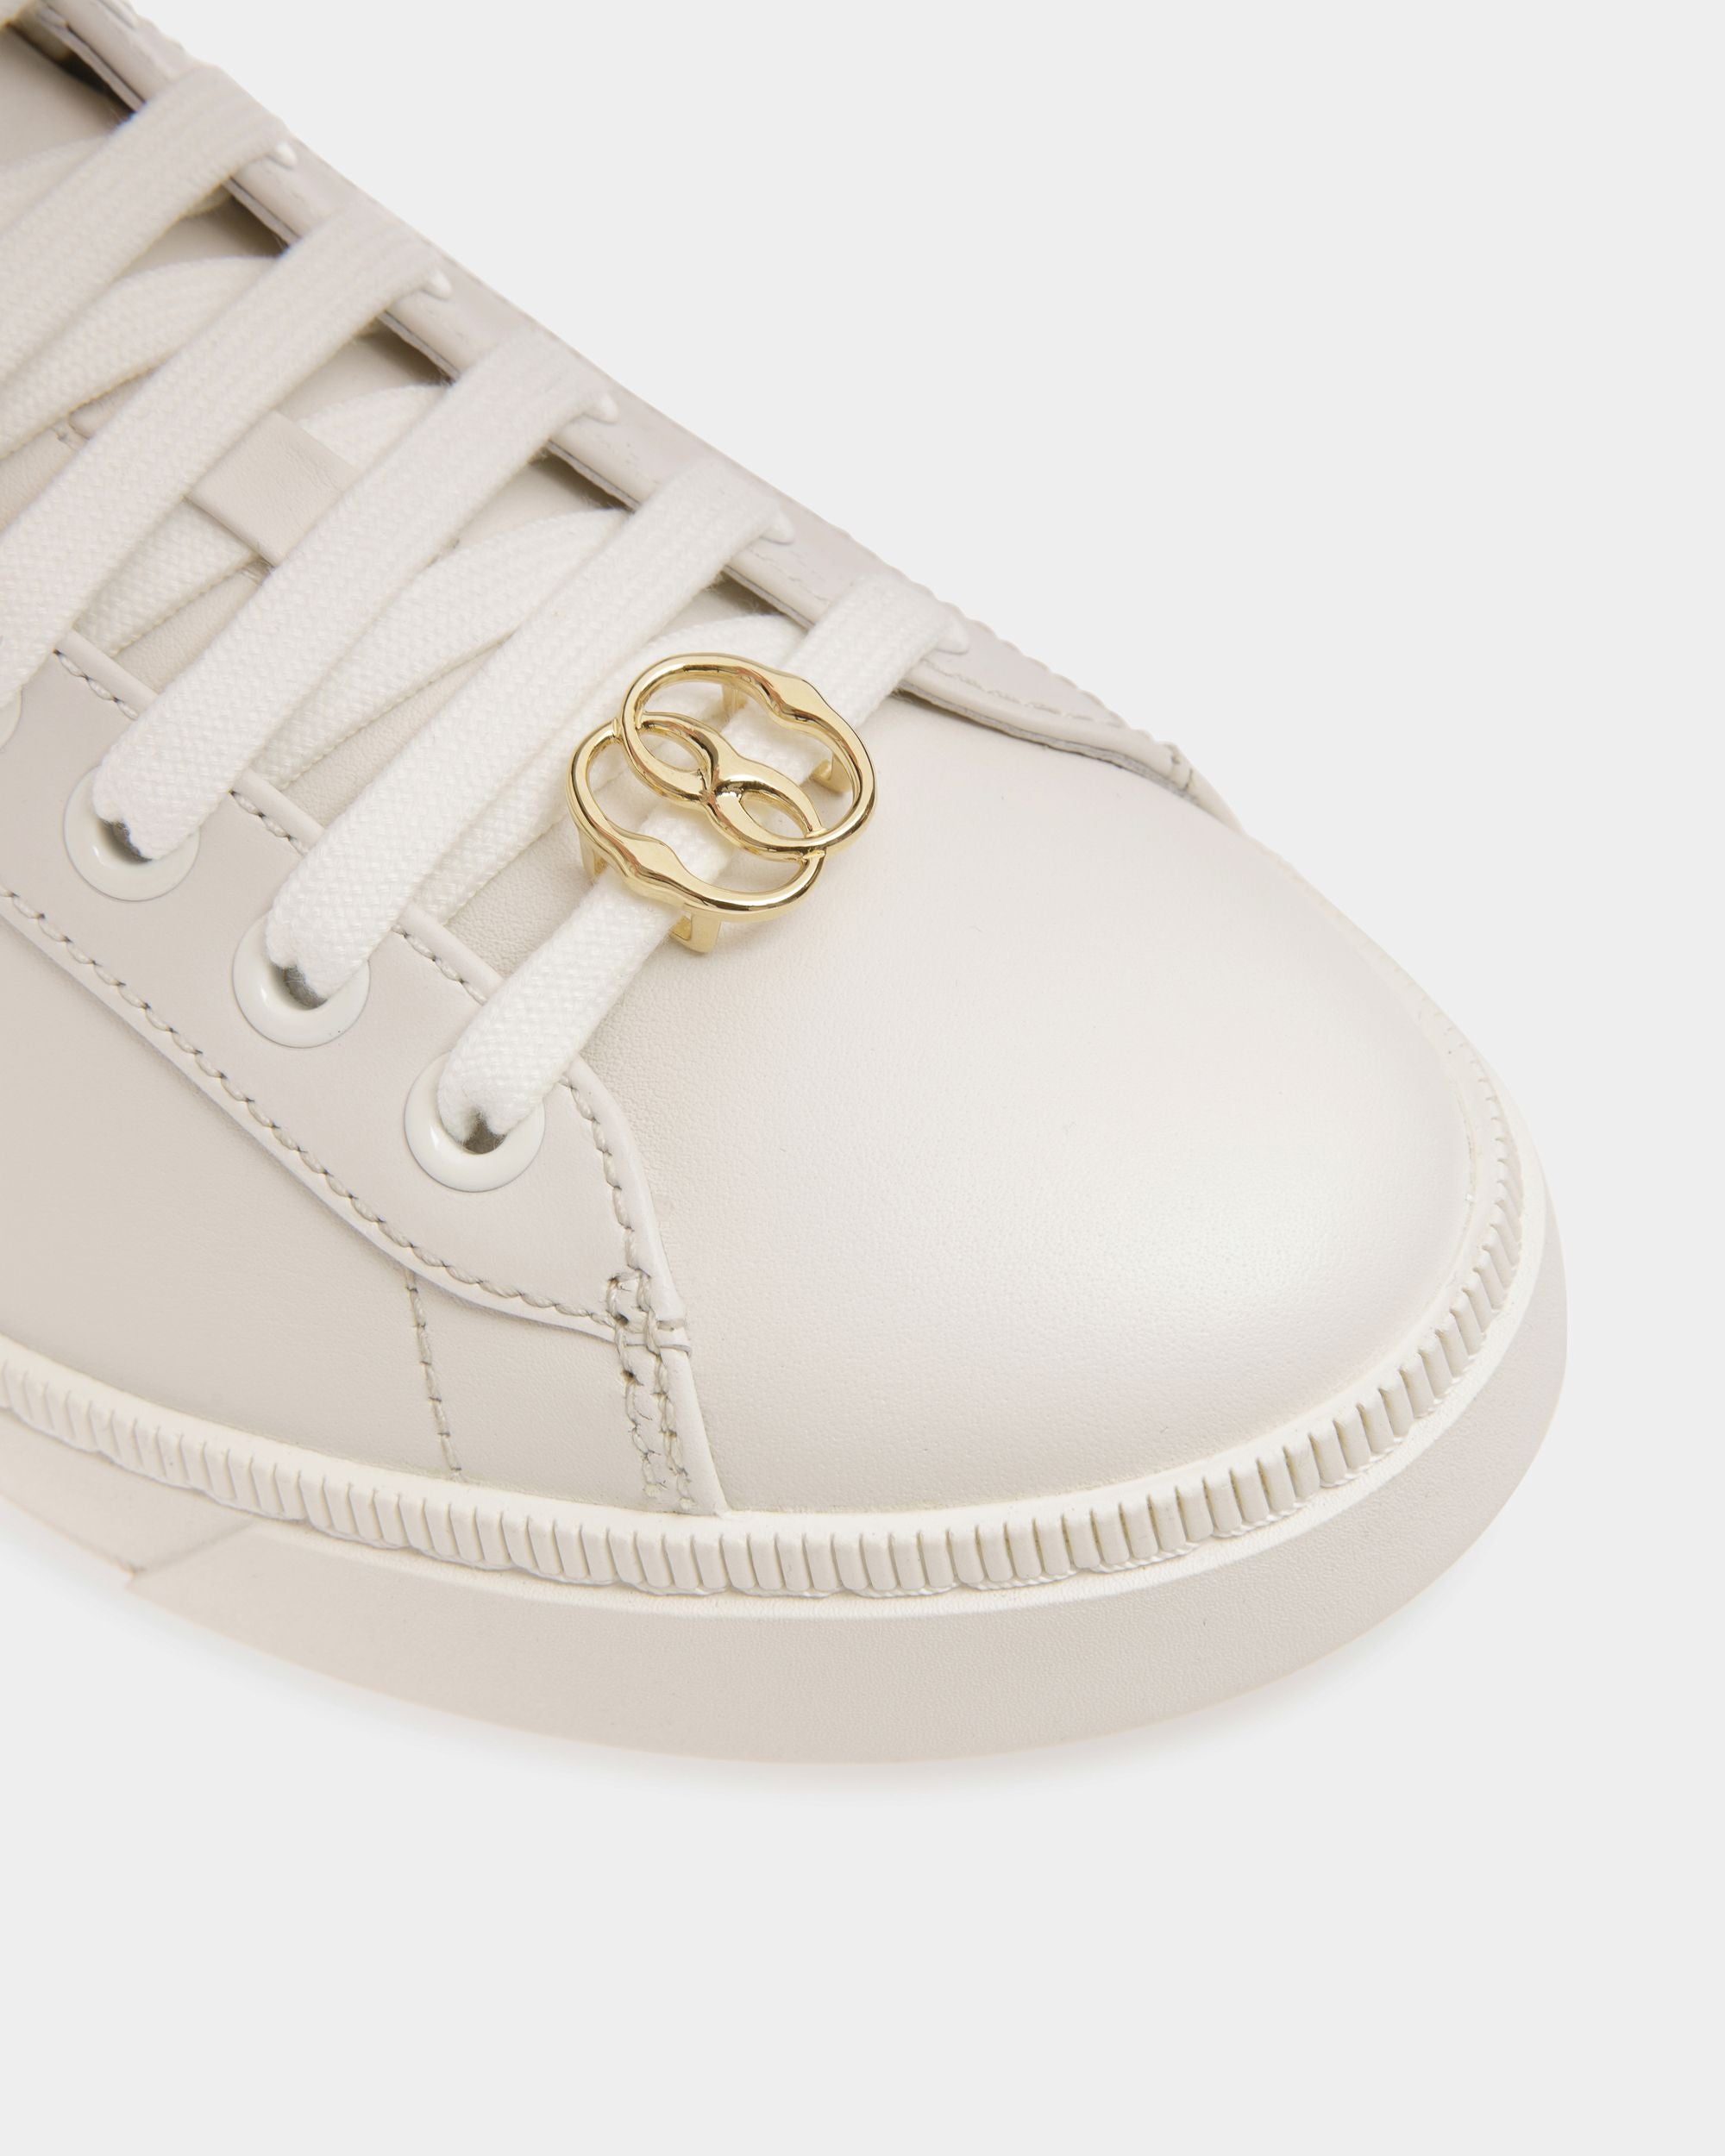 Ryver | Women's Sneakers | White Leather | Bally | Still Life Detail